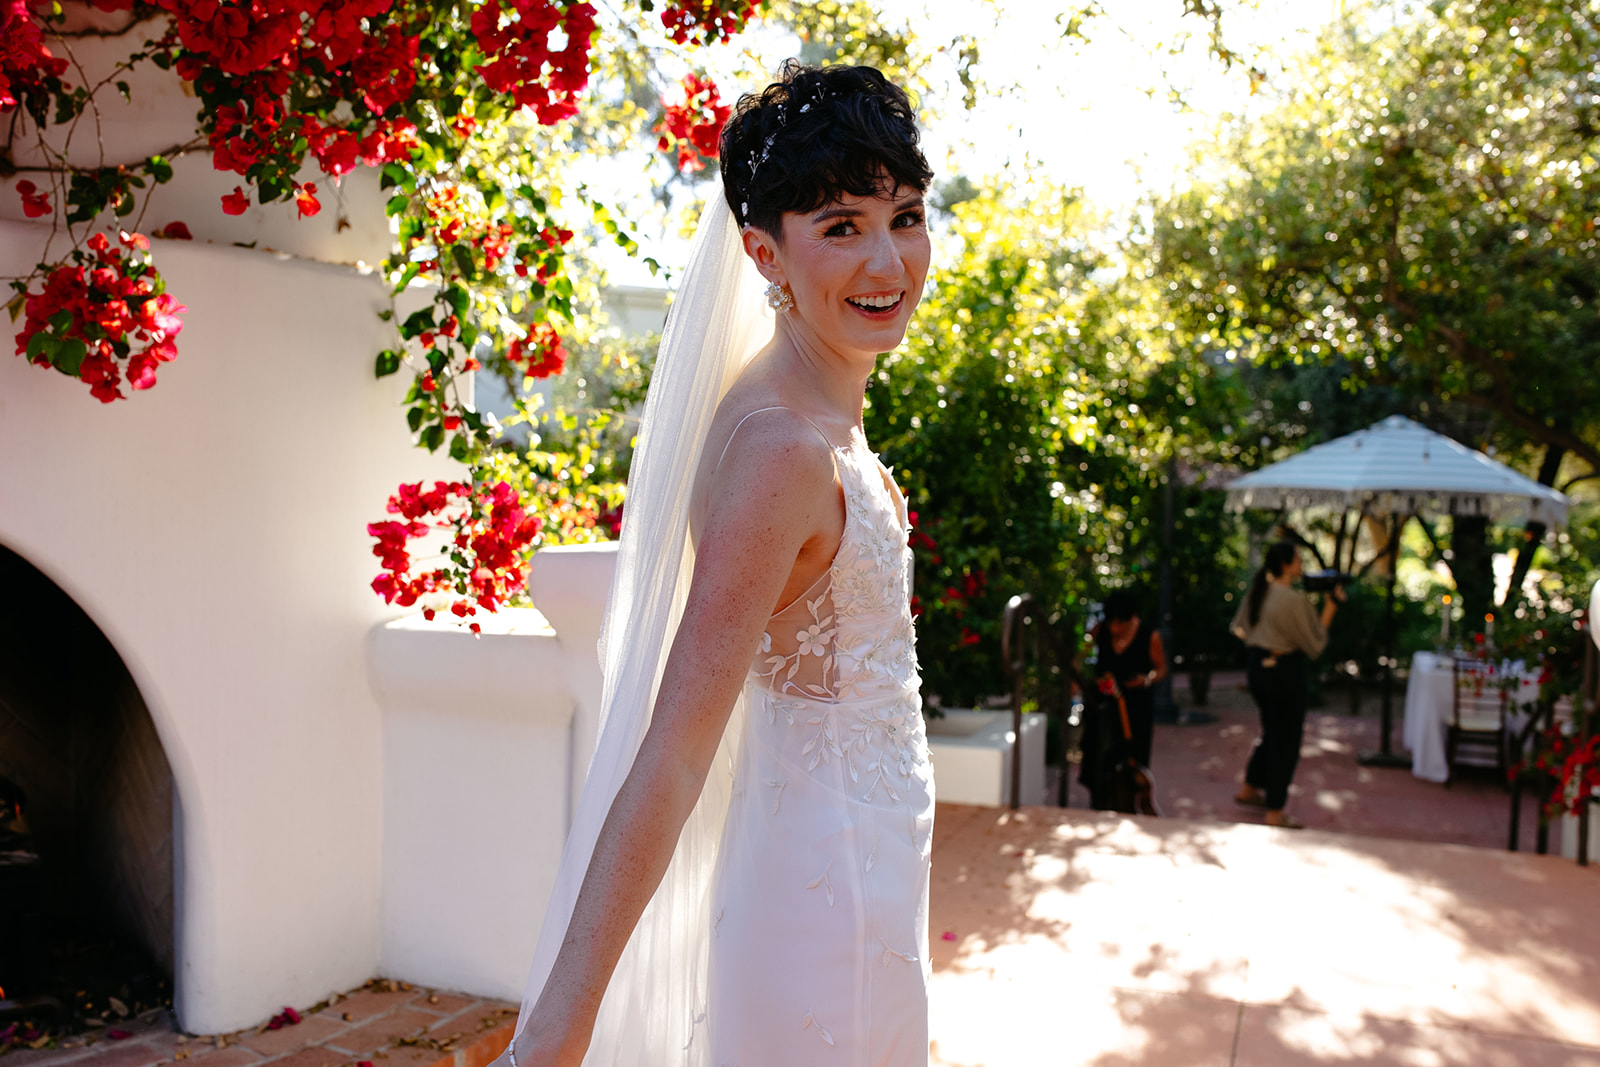 A person in a wedding dress smiles while standing outside near a white wall adorned with red flowers. The background includes greenery and outdoor furniture.